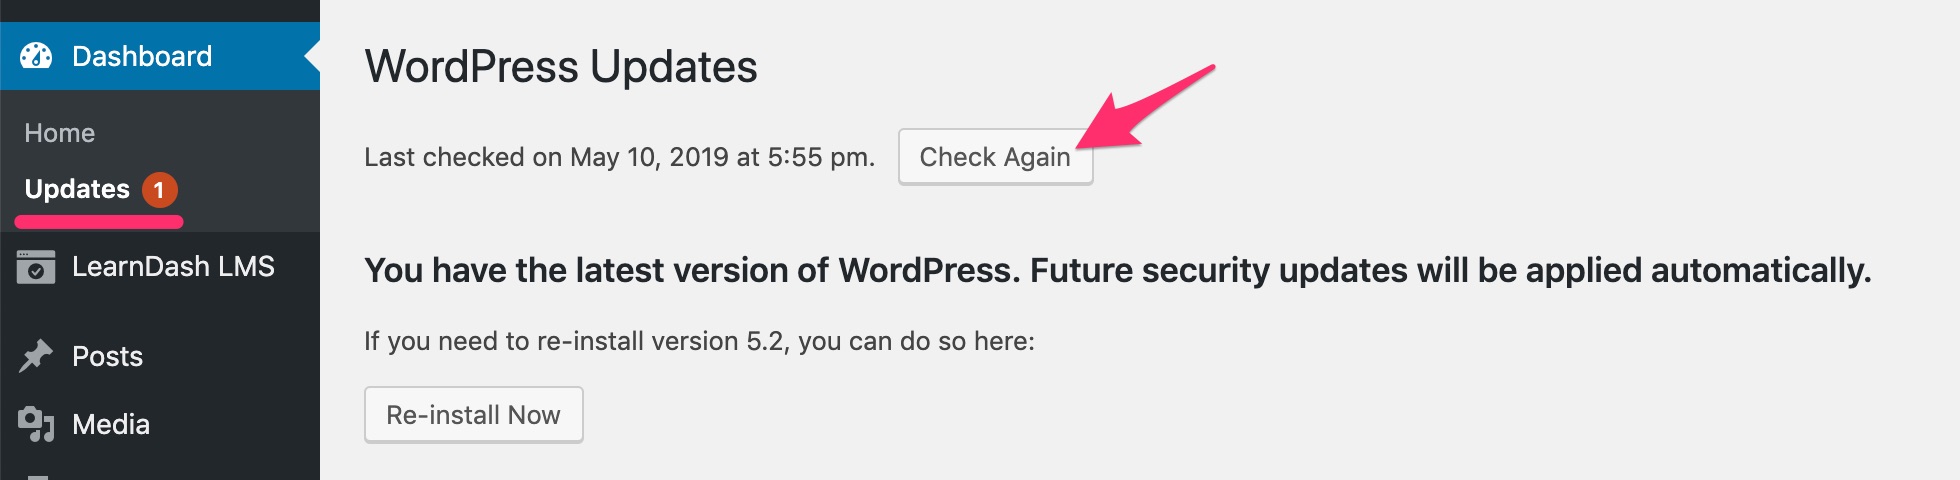 Check for WordPress updates button